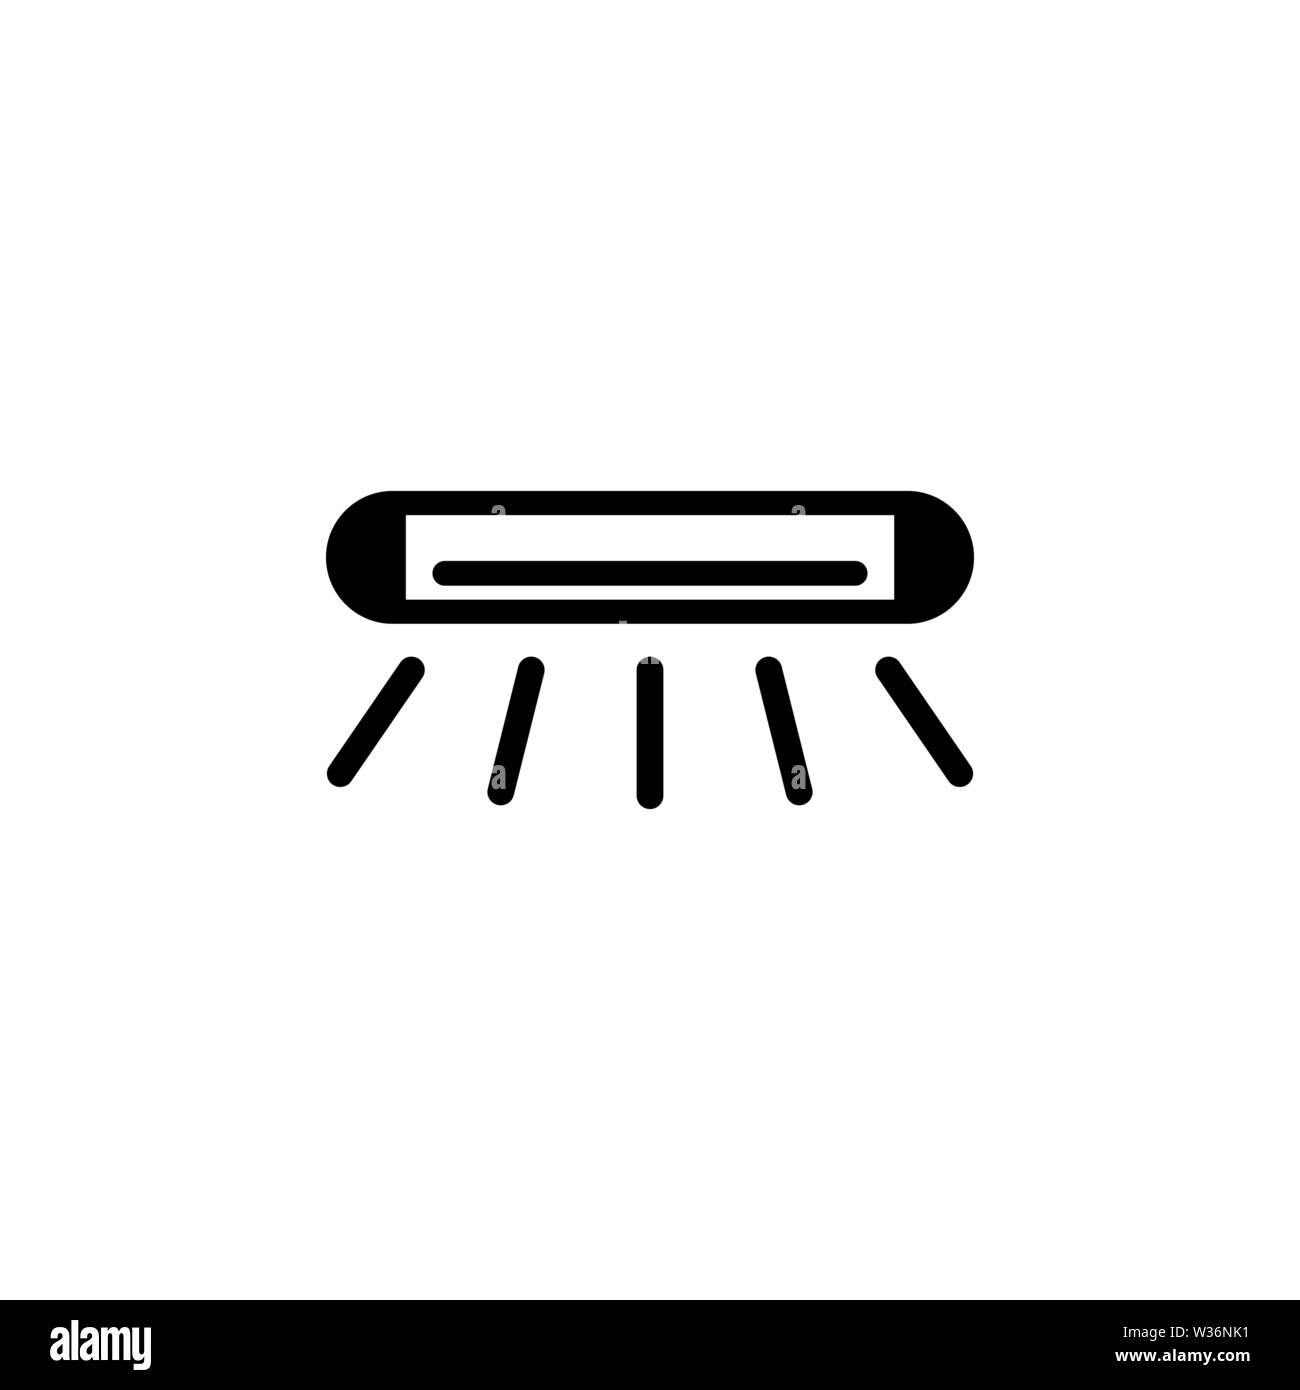 Fluorescent Lamp vector icon. Simple flat symbol on white background Stock Vector